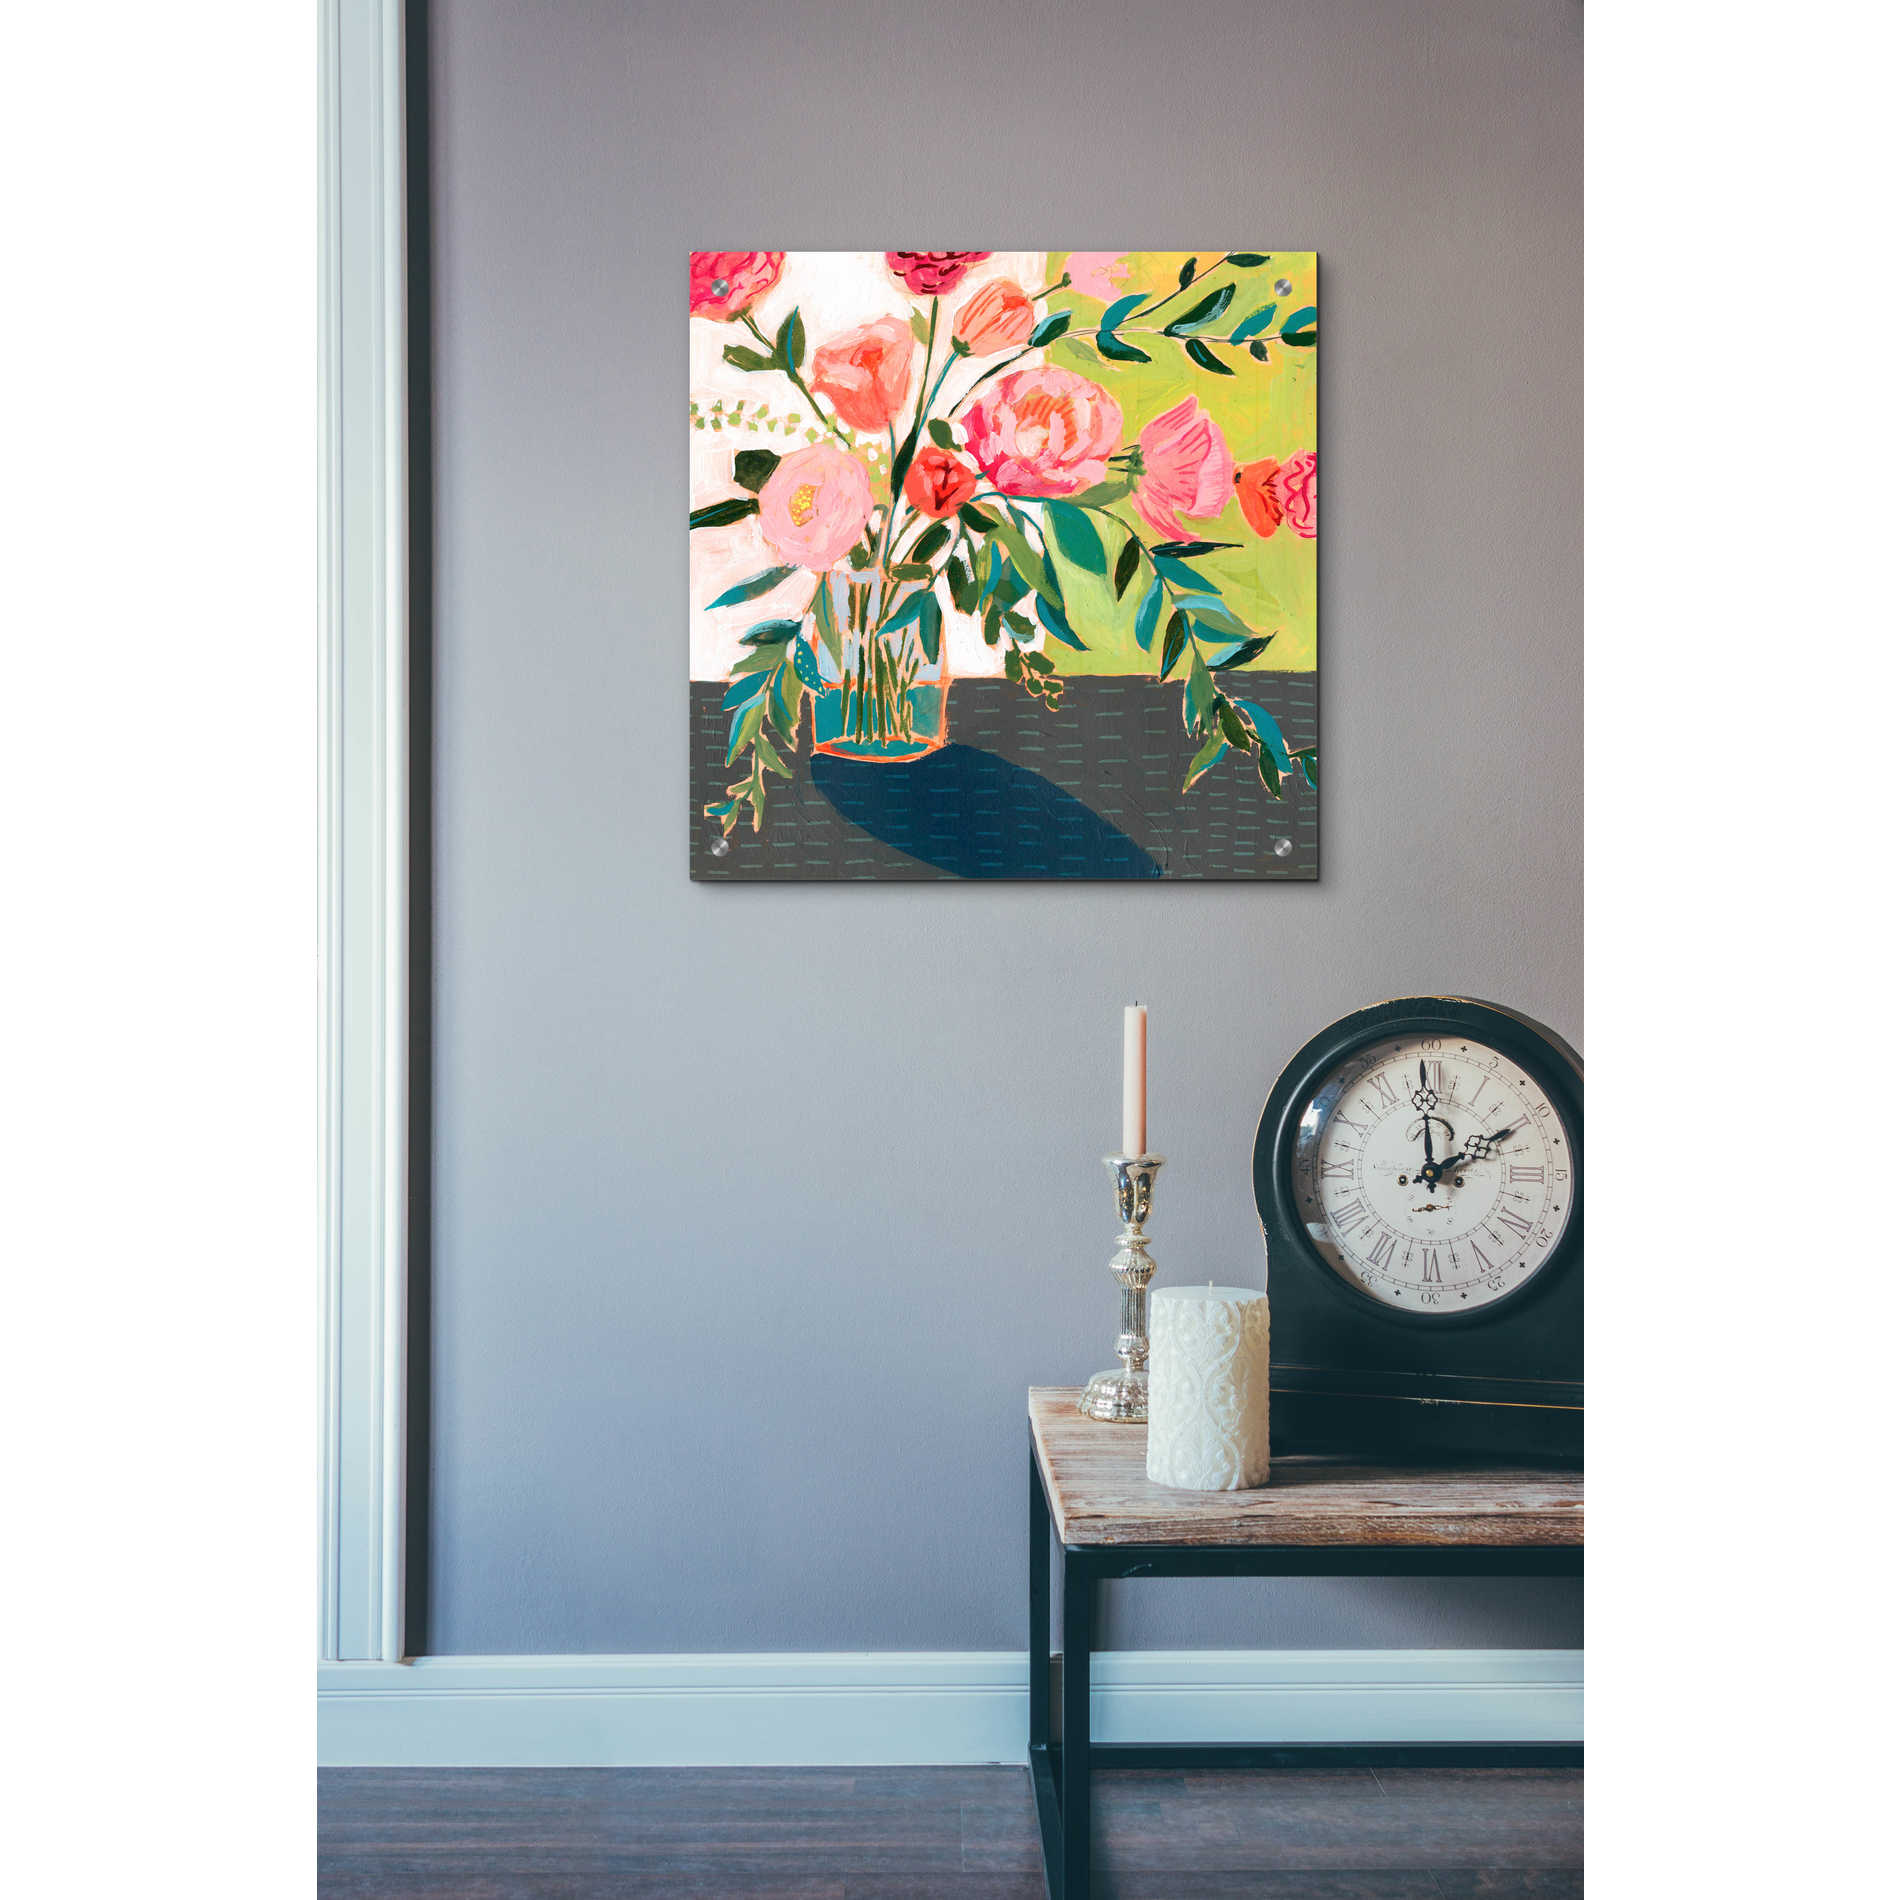 Epic Art 'Quirky Bouquet I' by Victoria Borges, Acrylic Wall Art,24x24